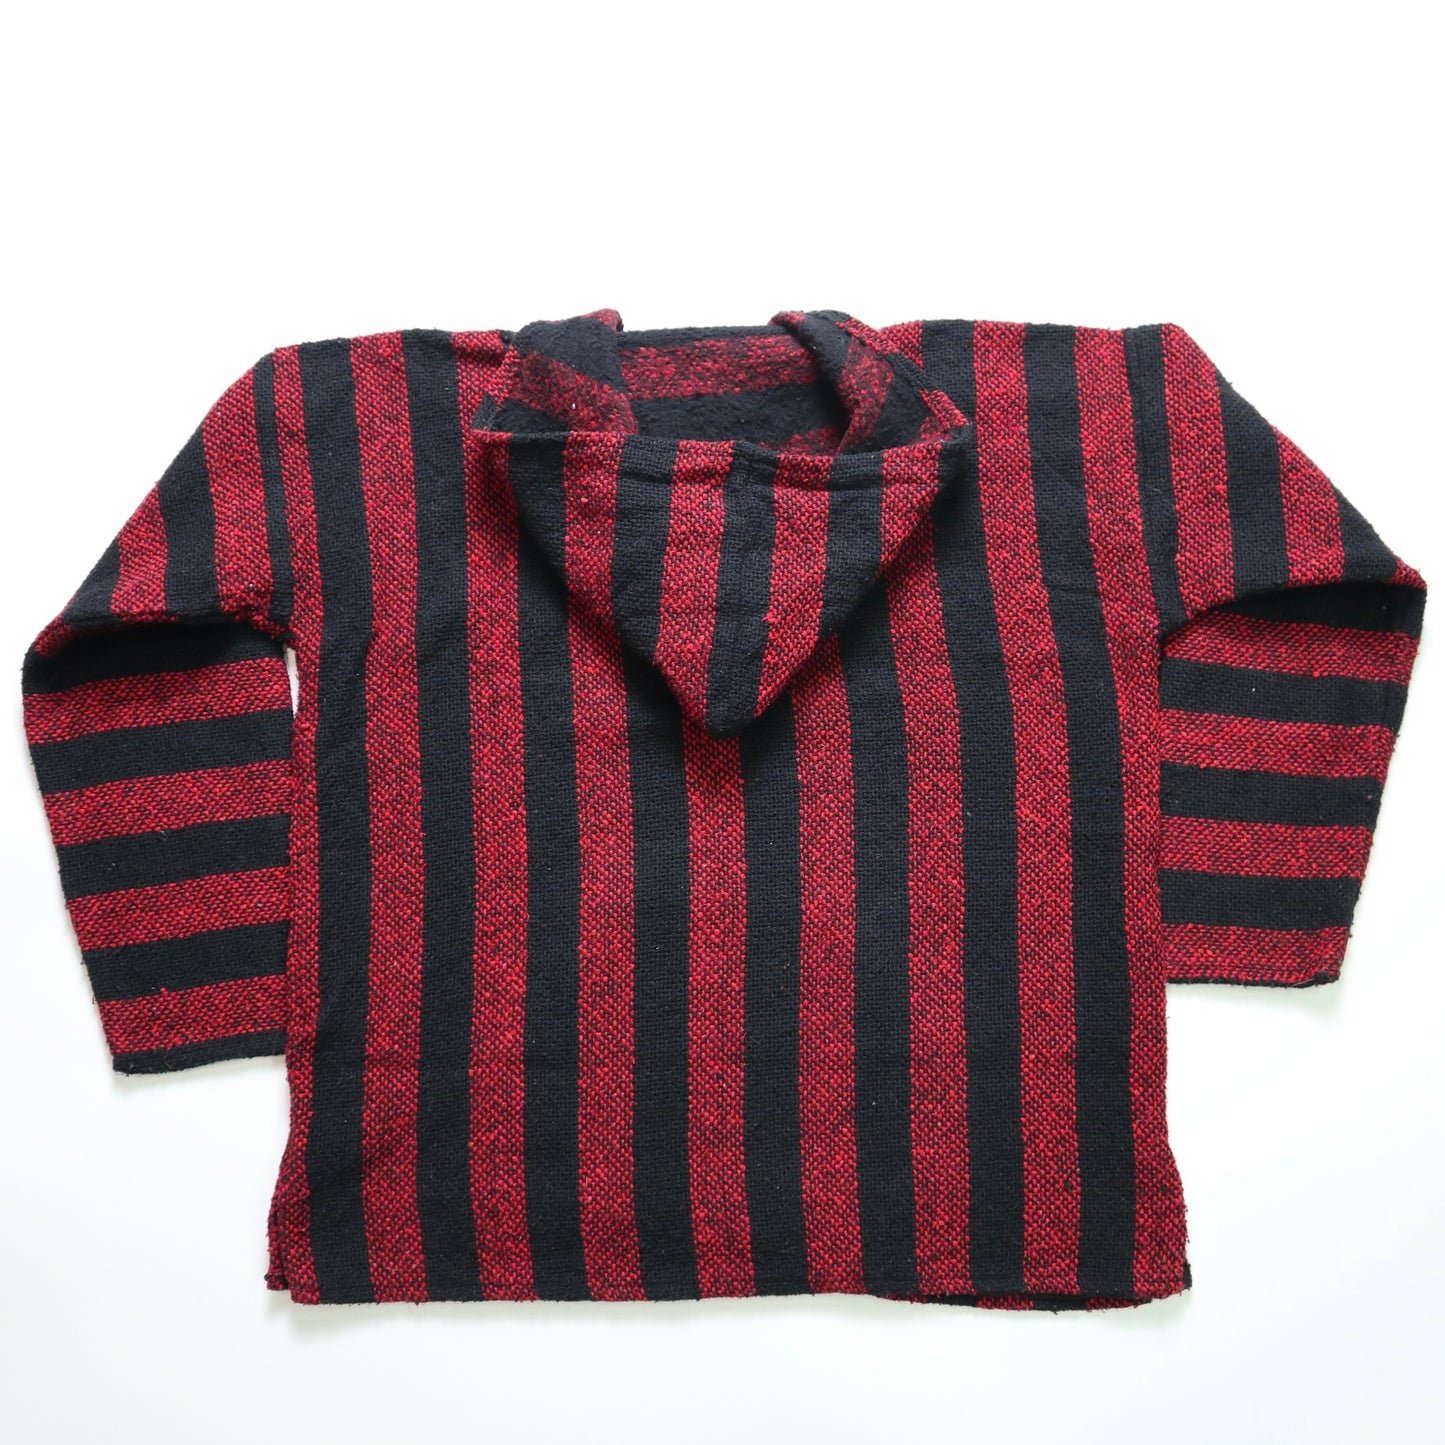 Red and Black Mexican Smock Mexican Hooded Top